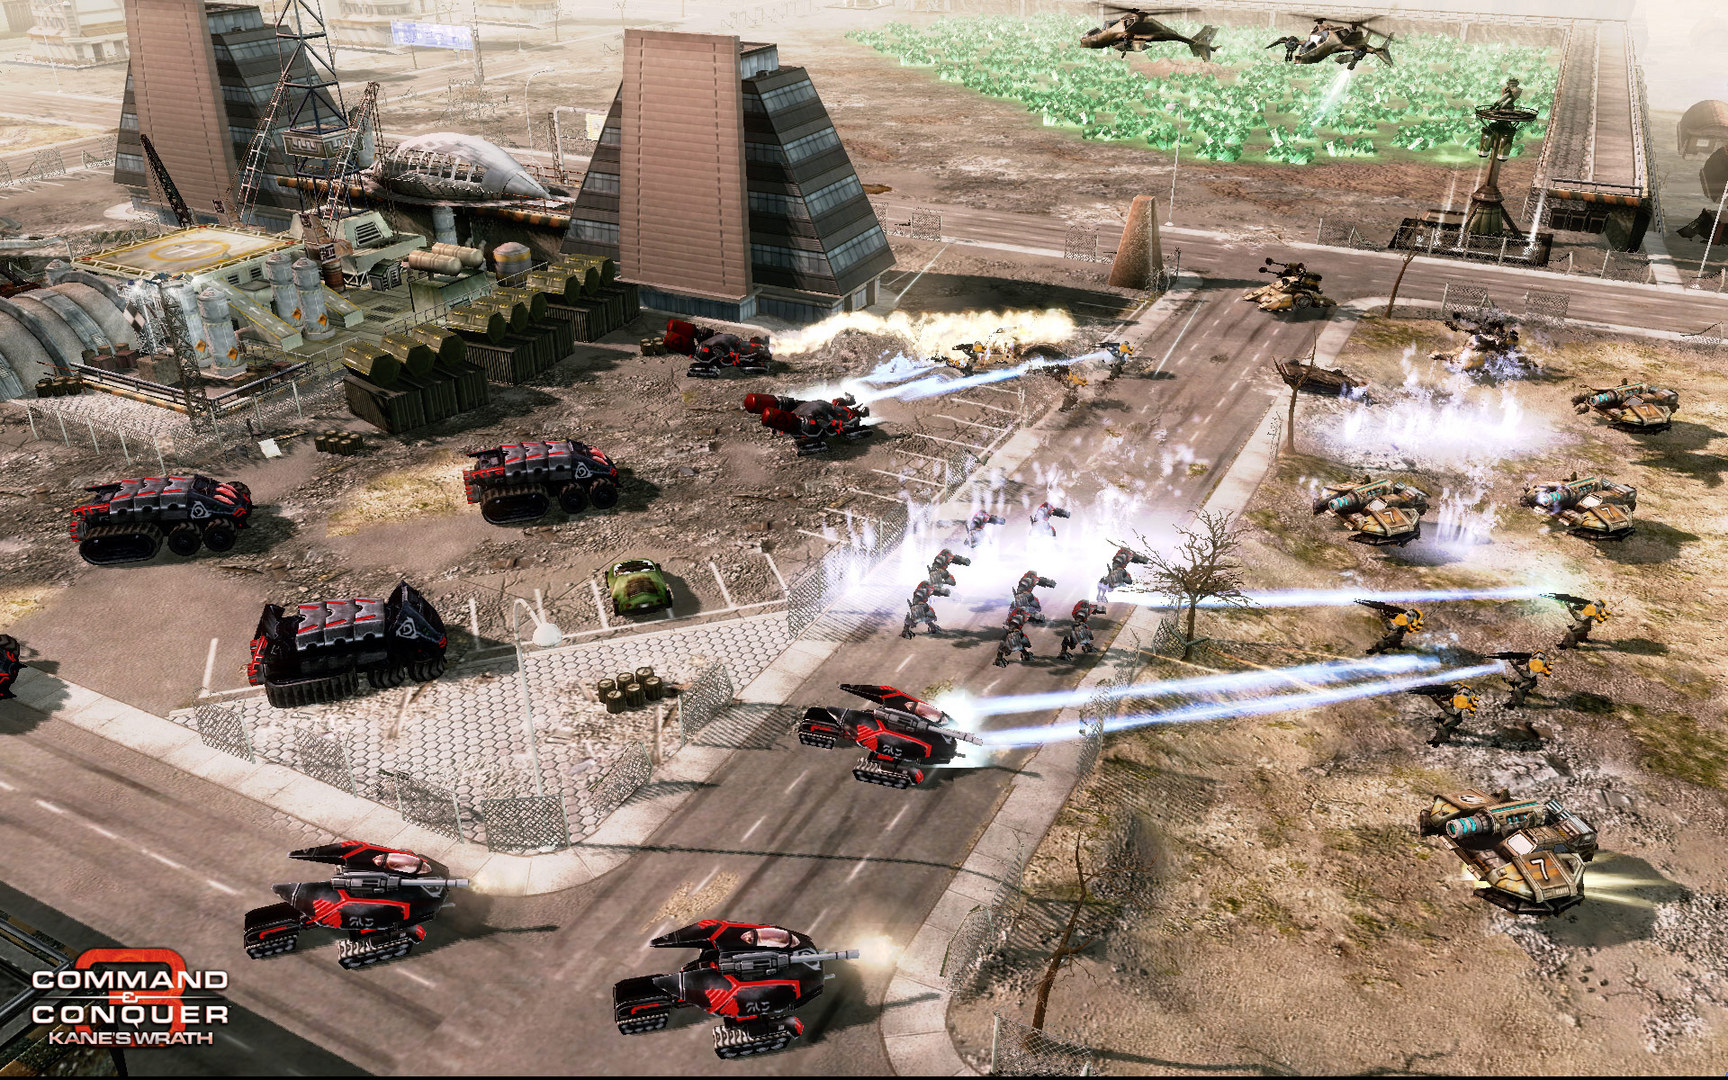 command and conquer 3 kanes wrath table